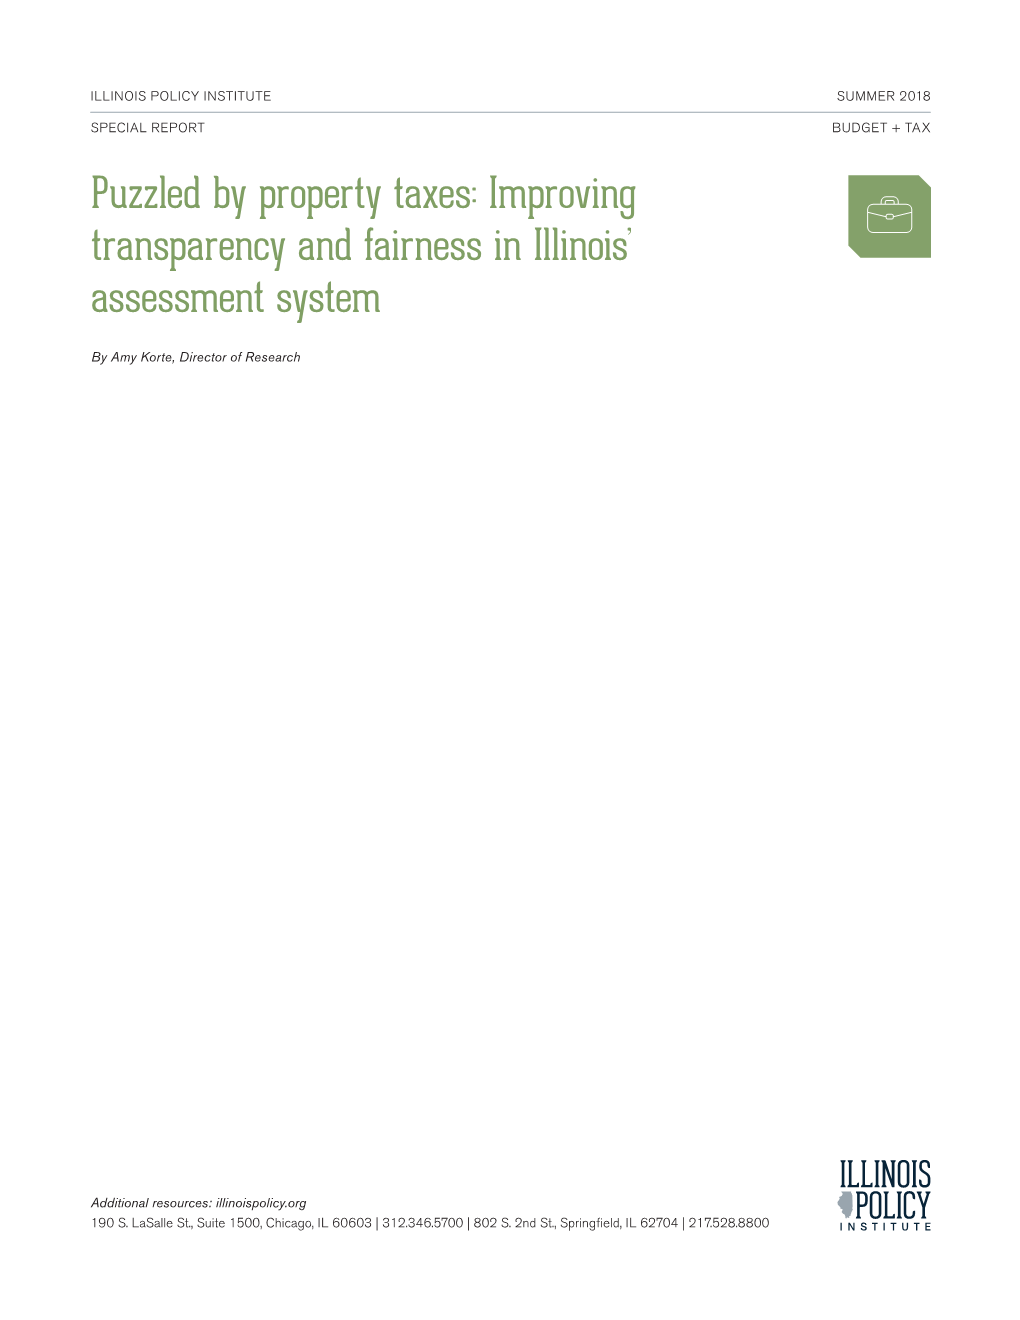 Puzzled by Property Taxes: Improving Transparency and Fairness in Illinois’ Assessment System